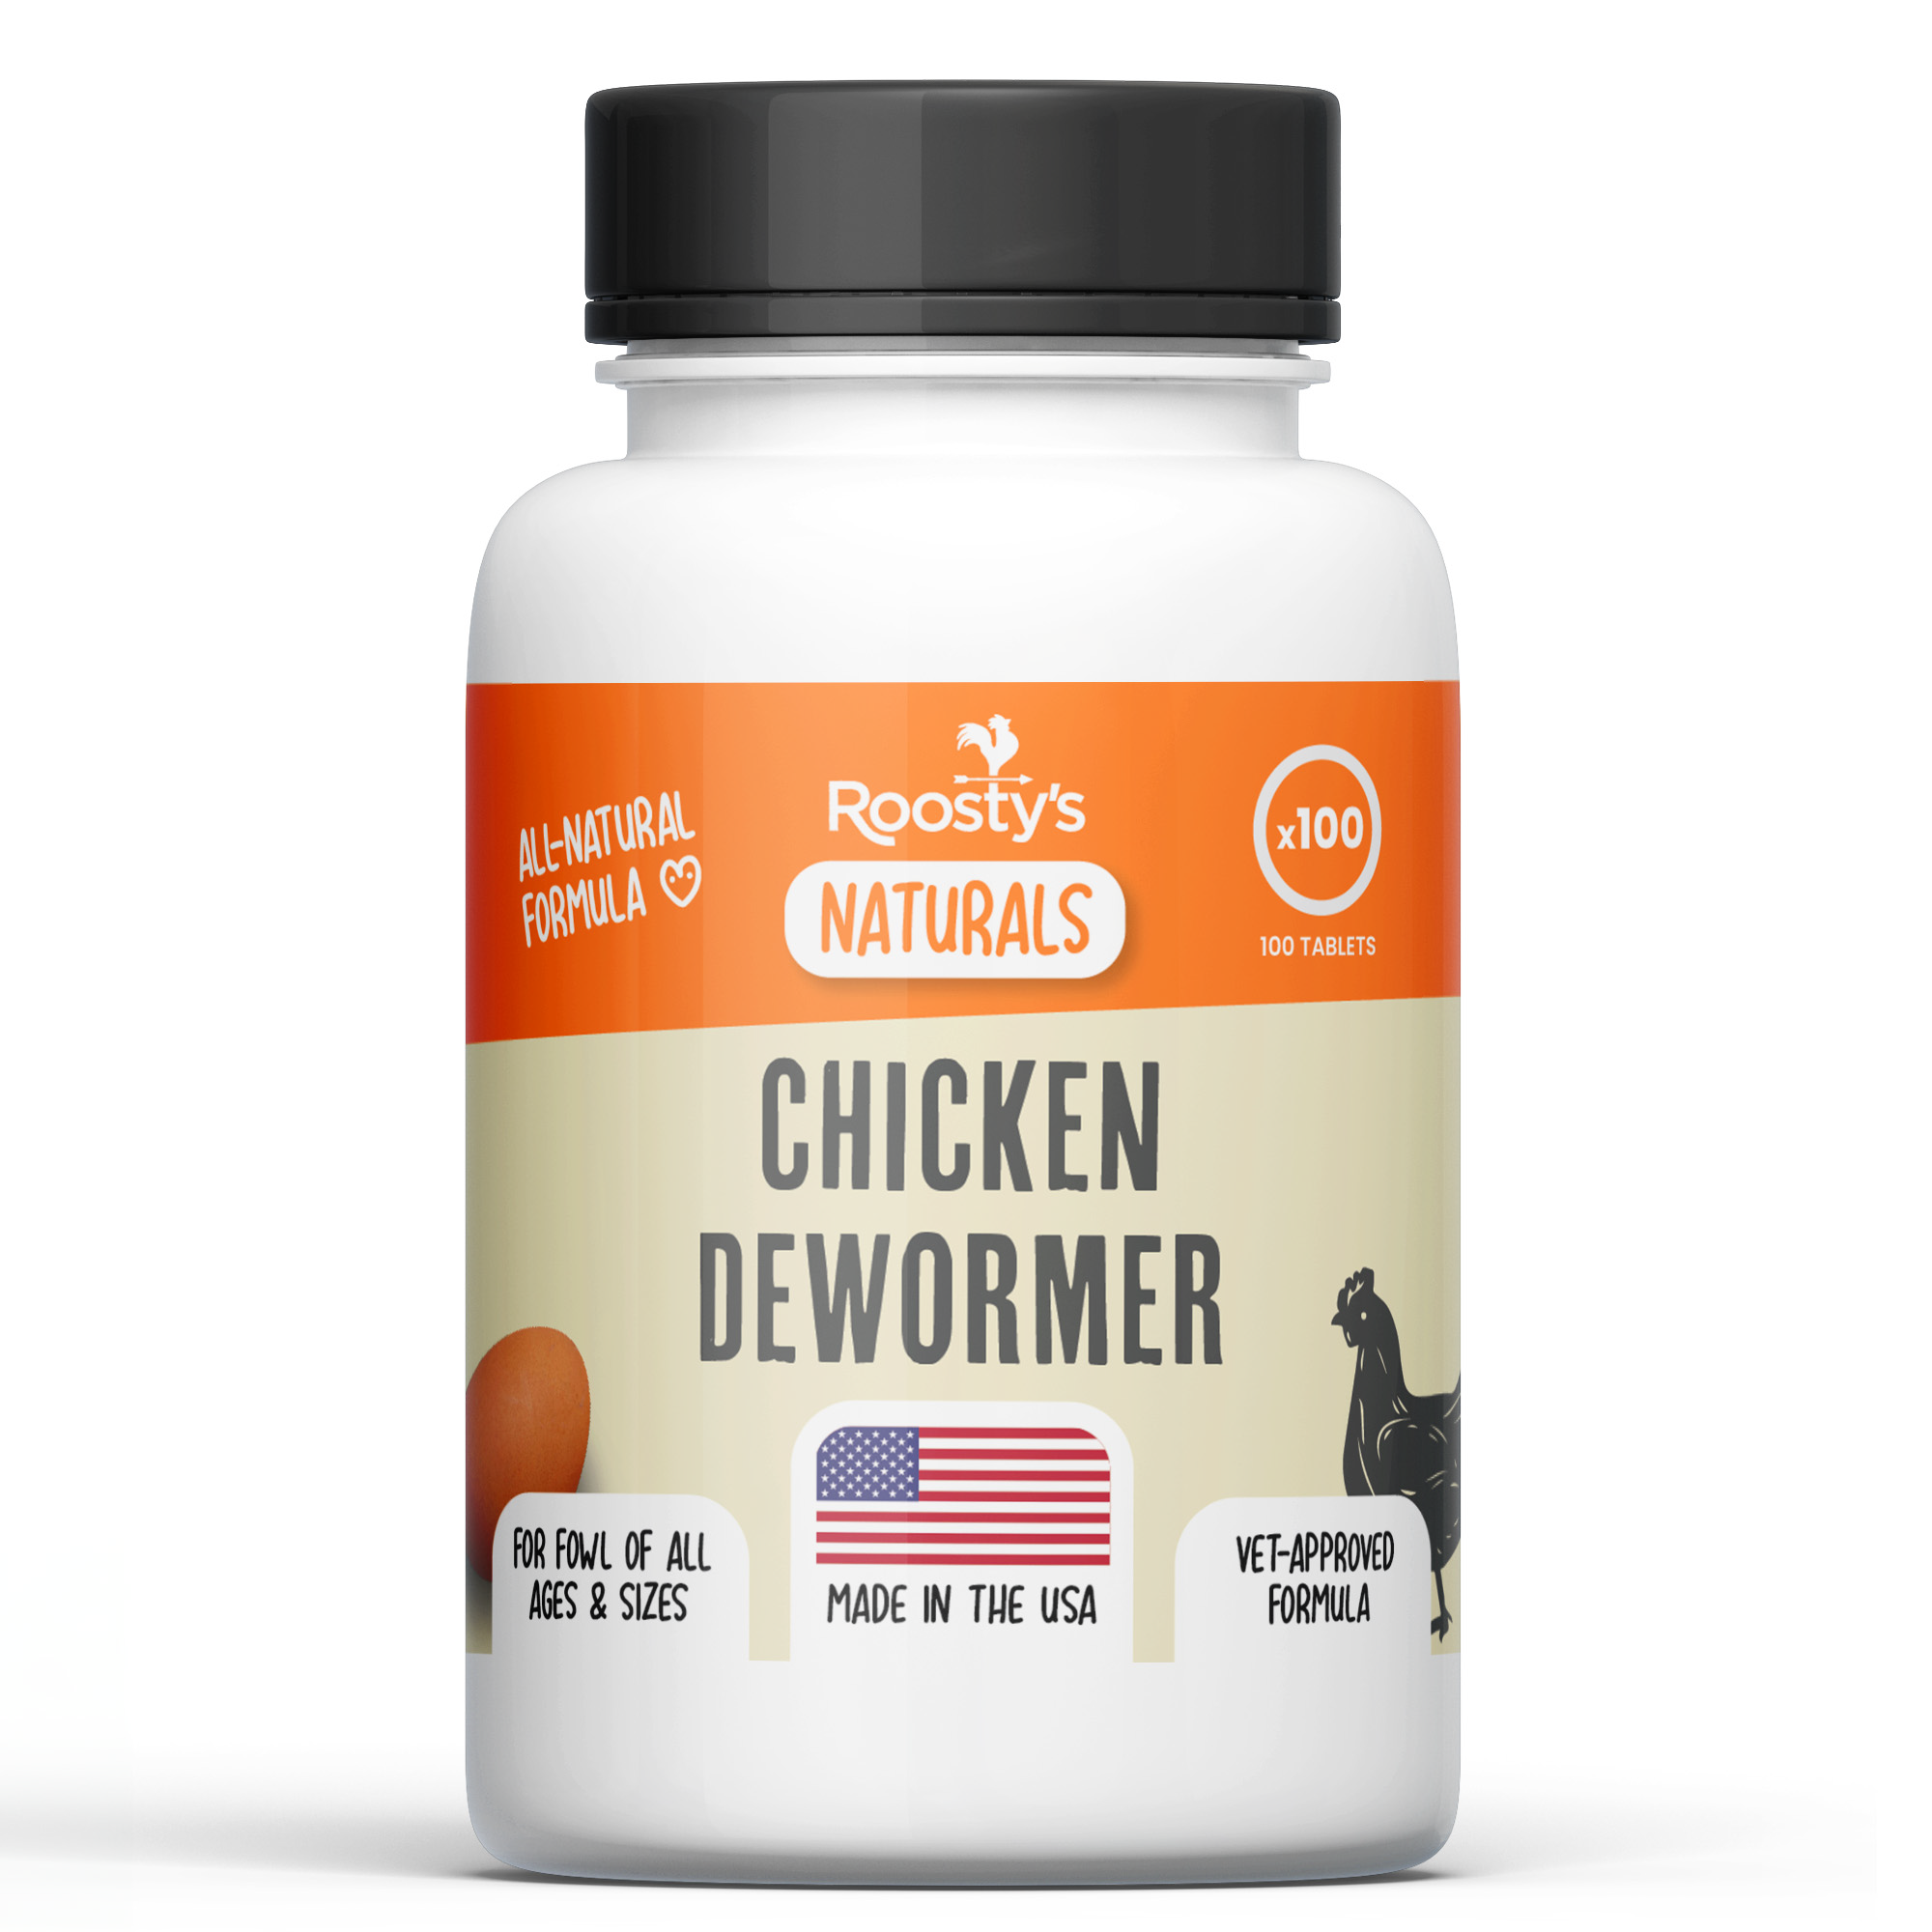 Roosty's Naturals Chicken Dewormer | 100 Tablets